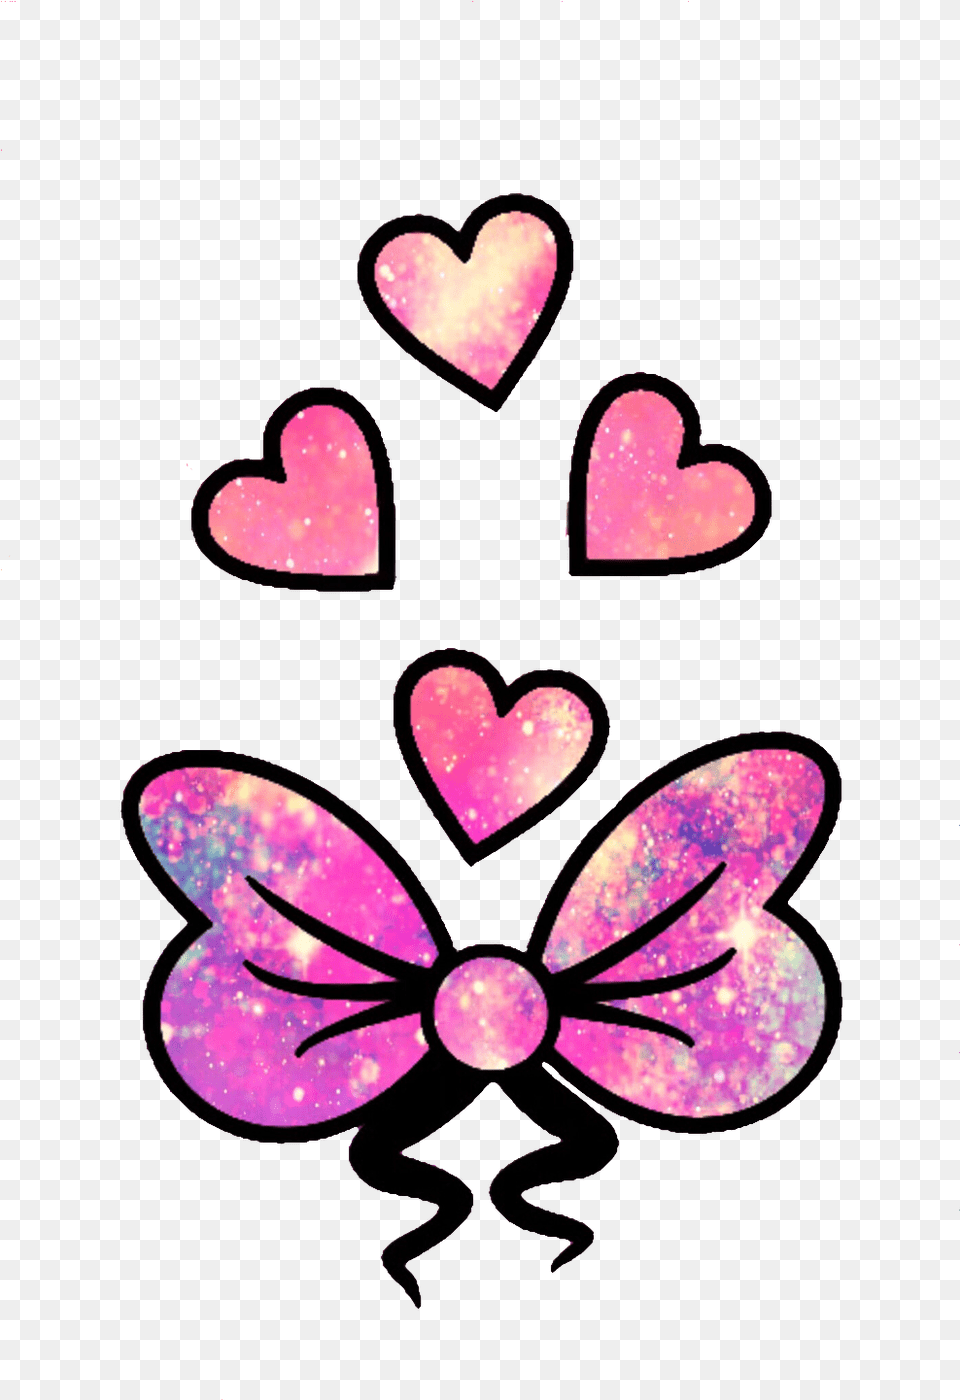 Galaxy Cute Girly Bow Hearts Love Pink Clipart Girly, Purple, Accessories Png